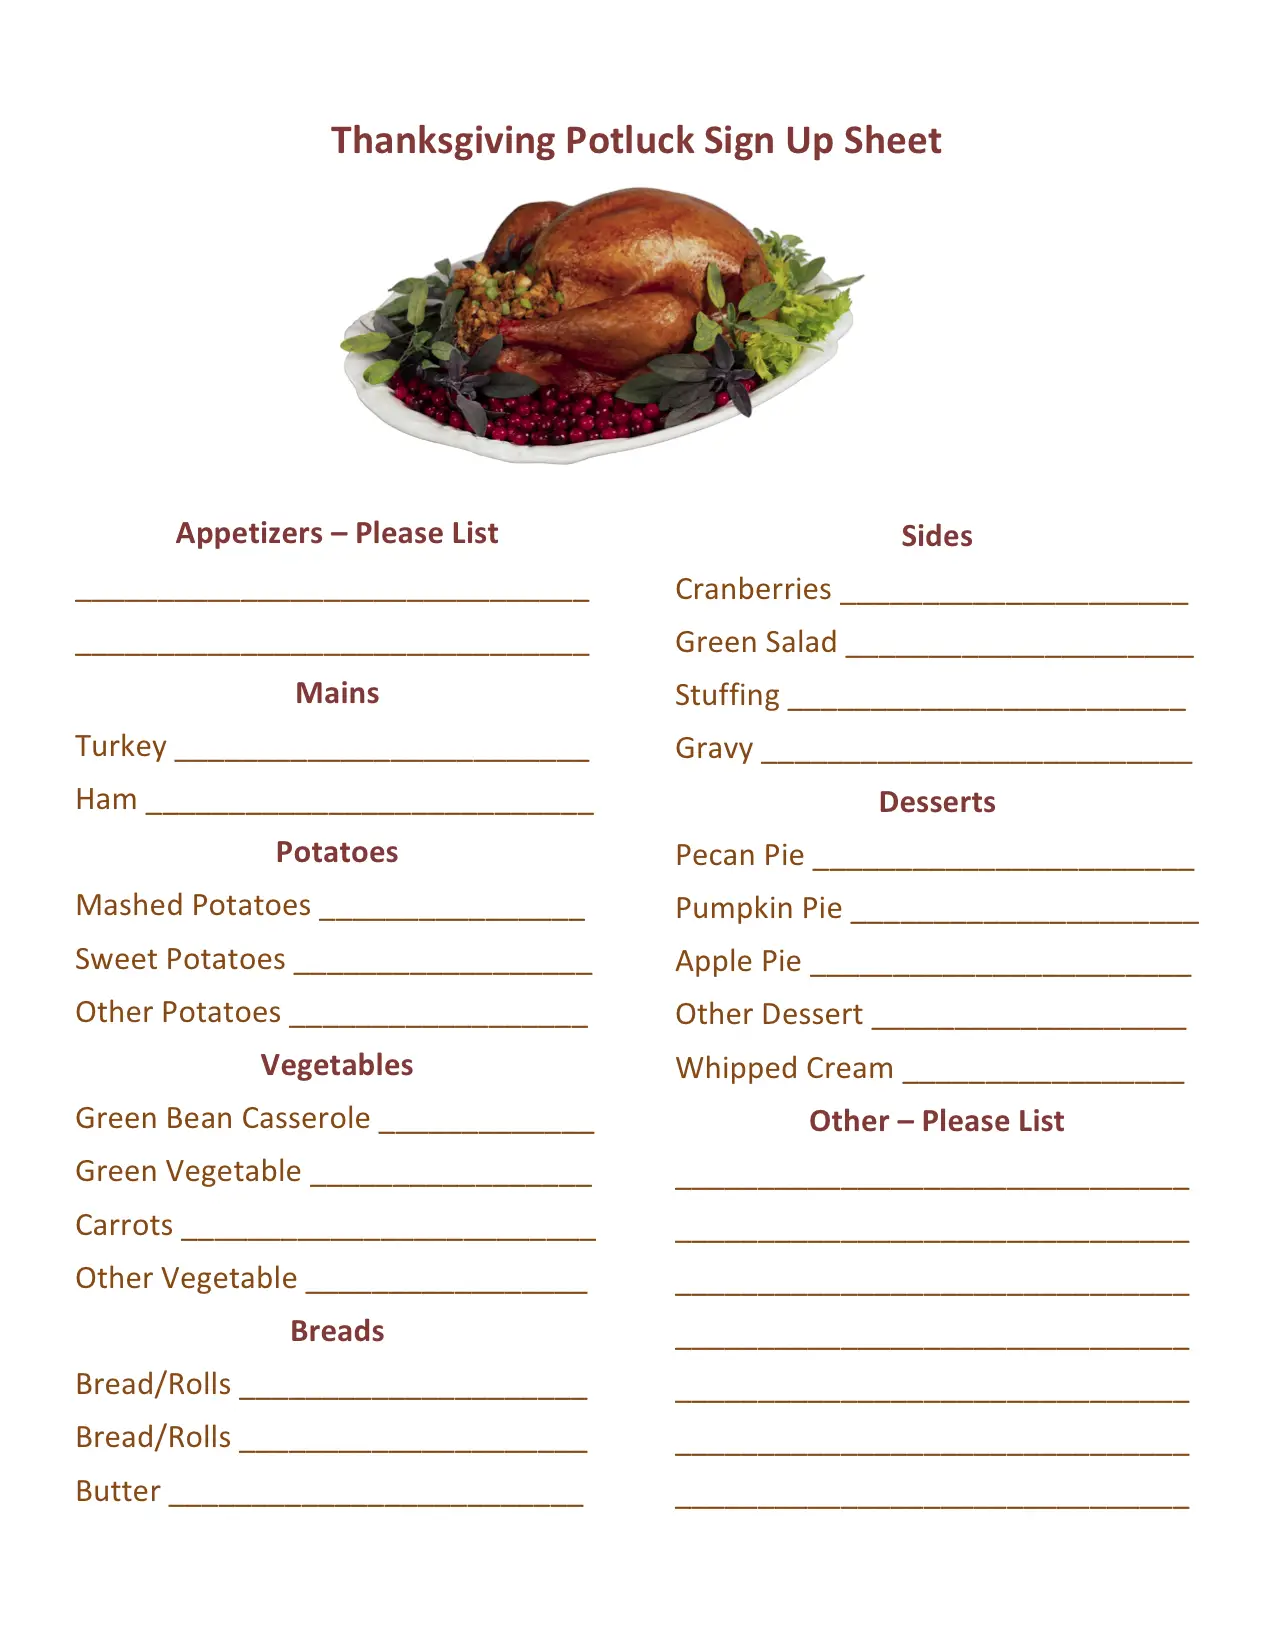 10 Thanksgiving Potluck Sign Up Sheets to keep it Smooth Kitty Baby Love